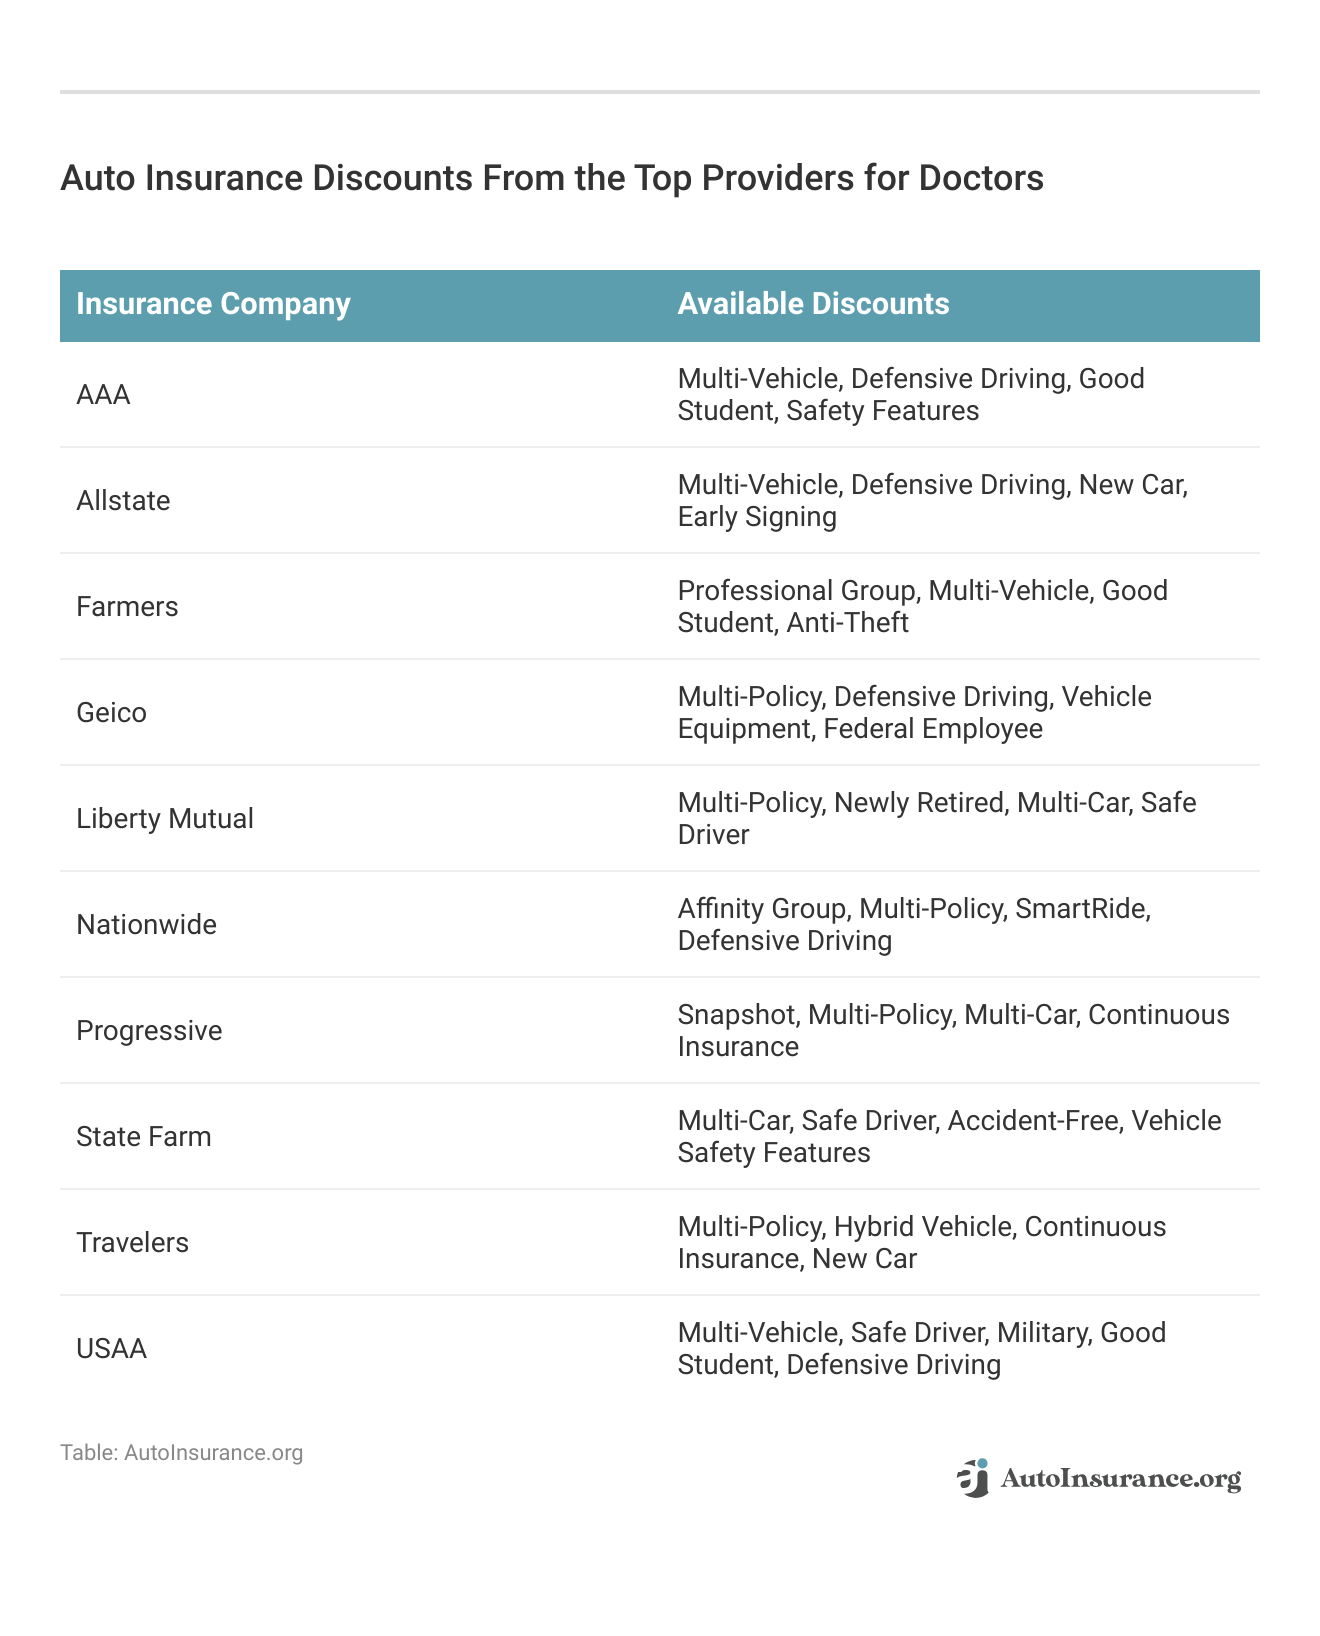 <h3>Auto Insurance Discounts From the Top Providers for Doctors</h3>